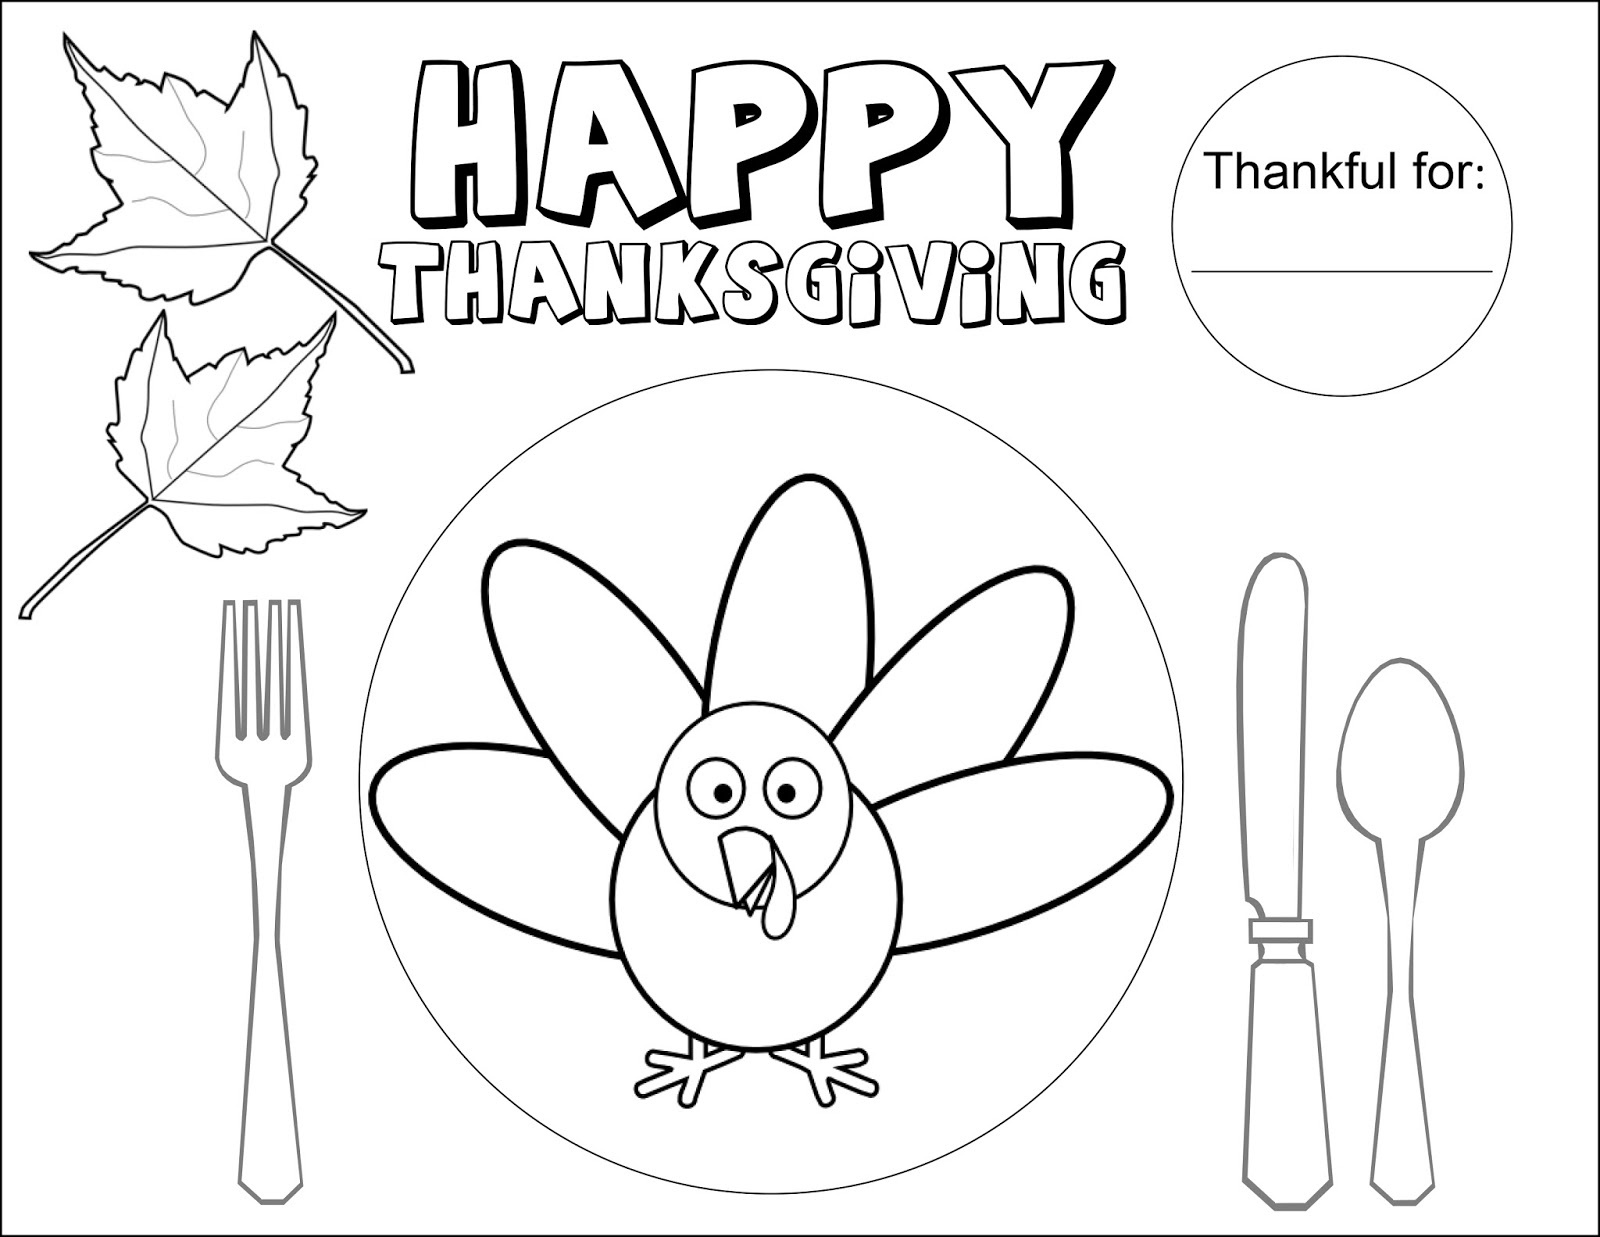 Coloring Placemats For Thanksgiving – Happy Easter &amp; Thanksgiving 2018 - Free Printable Thanksgiving Coloring Placemats